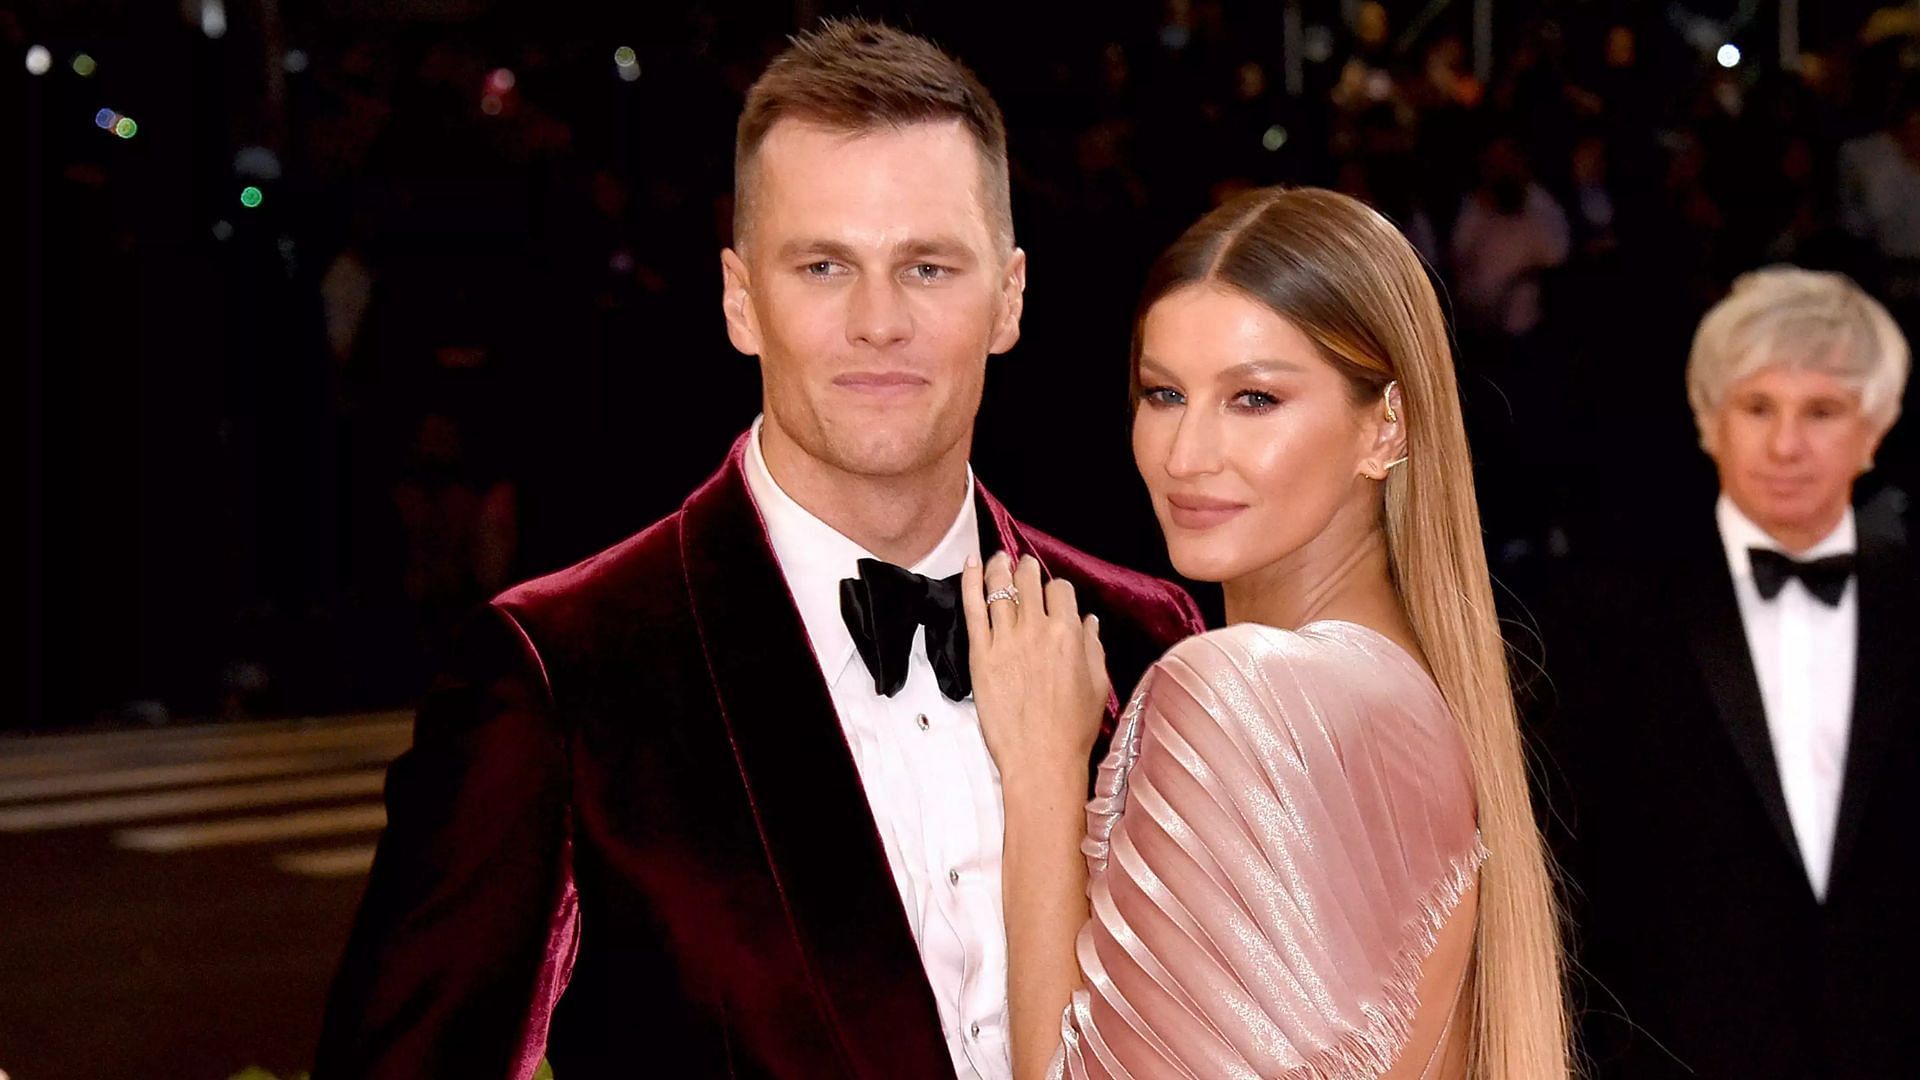 Gisele Bundchen and Tom Brady at the 2019 Met Gala, their last as a married couple. (Image credit: John Shearer/Getty Images)